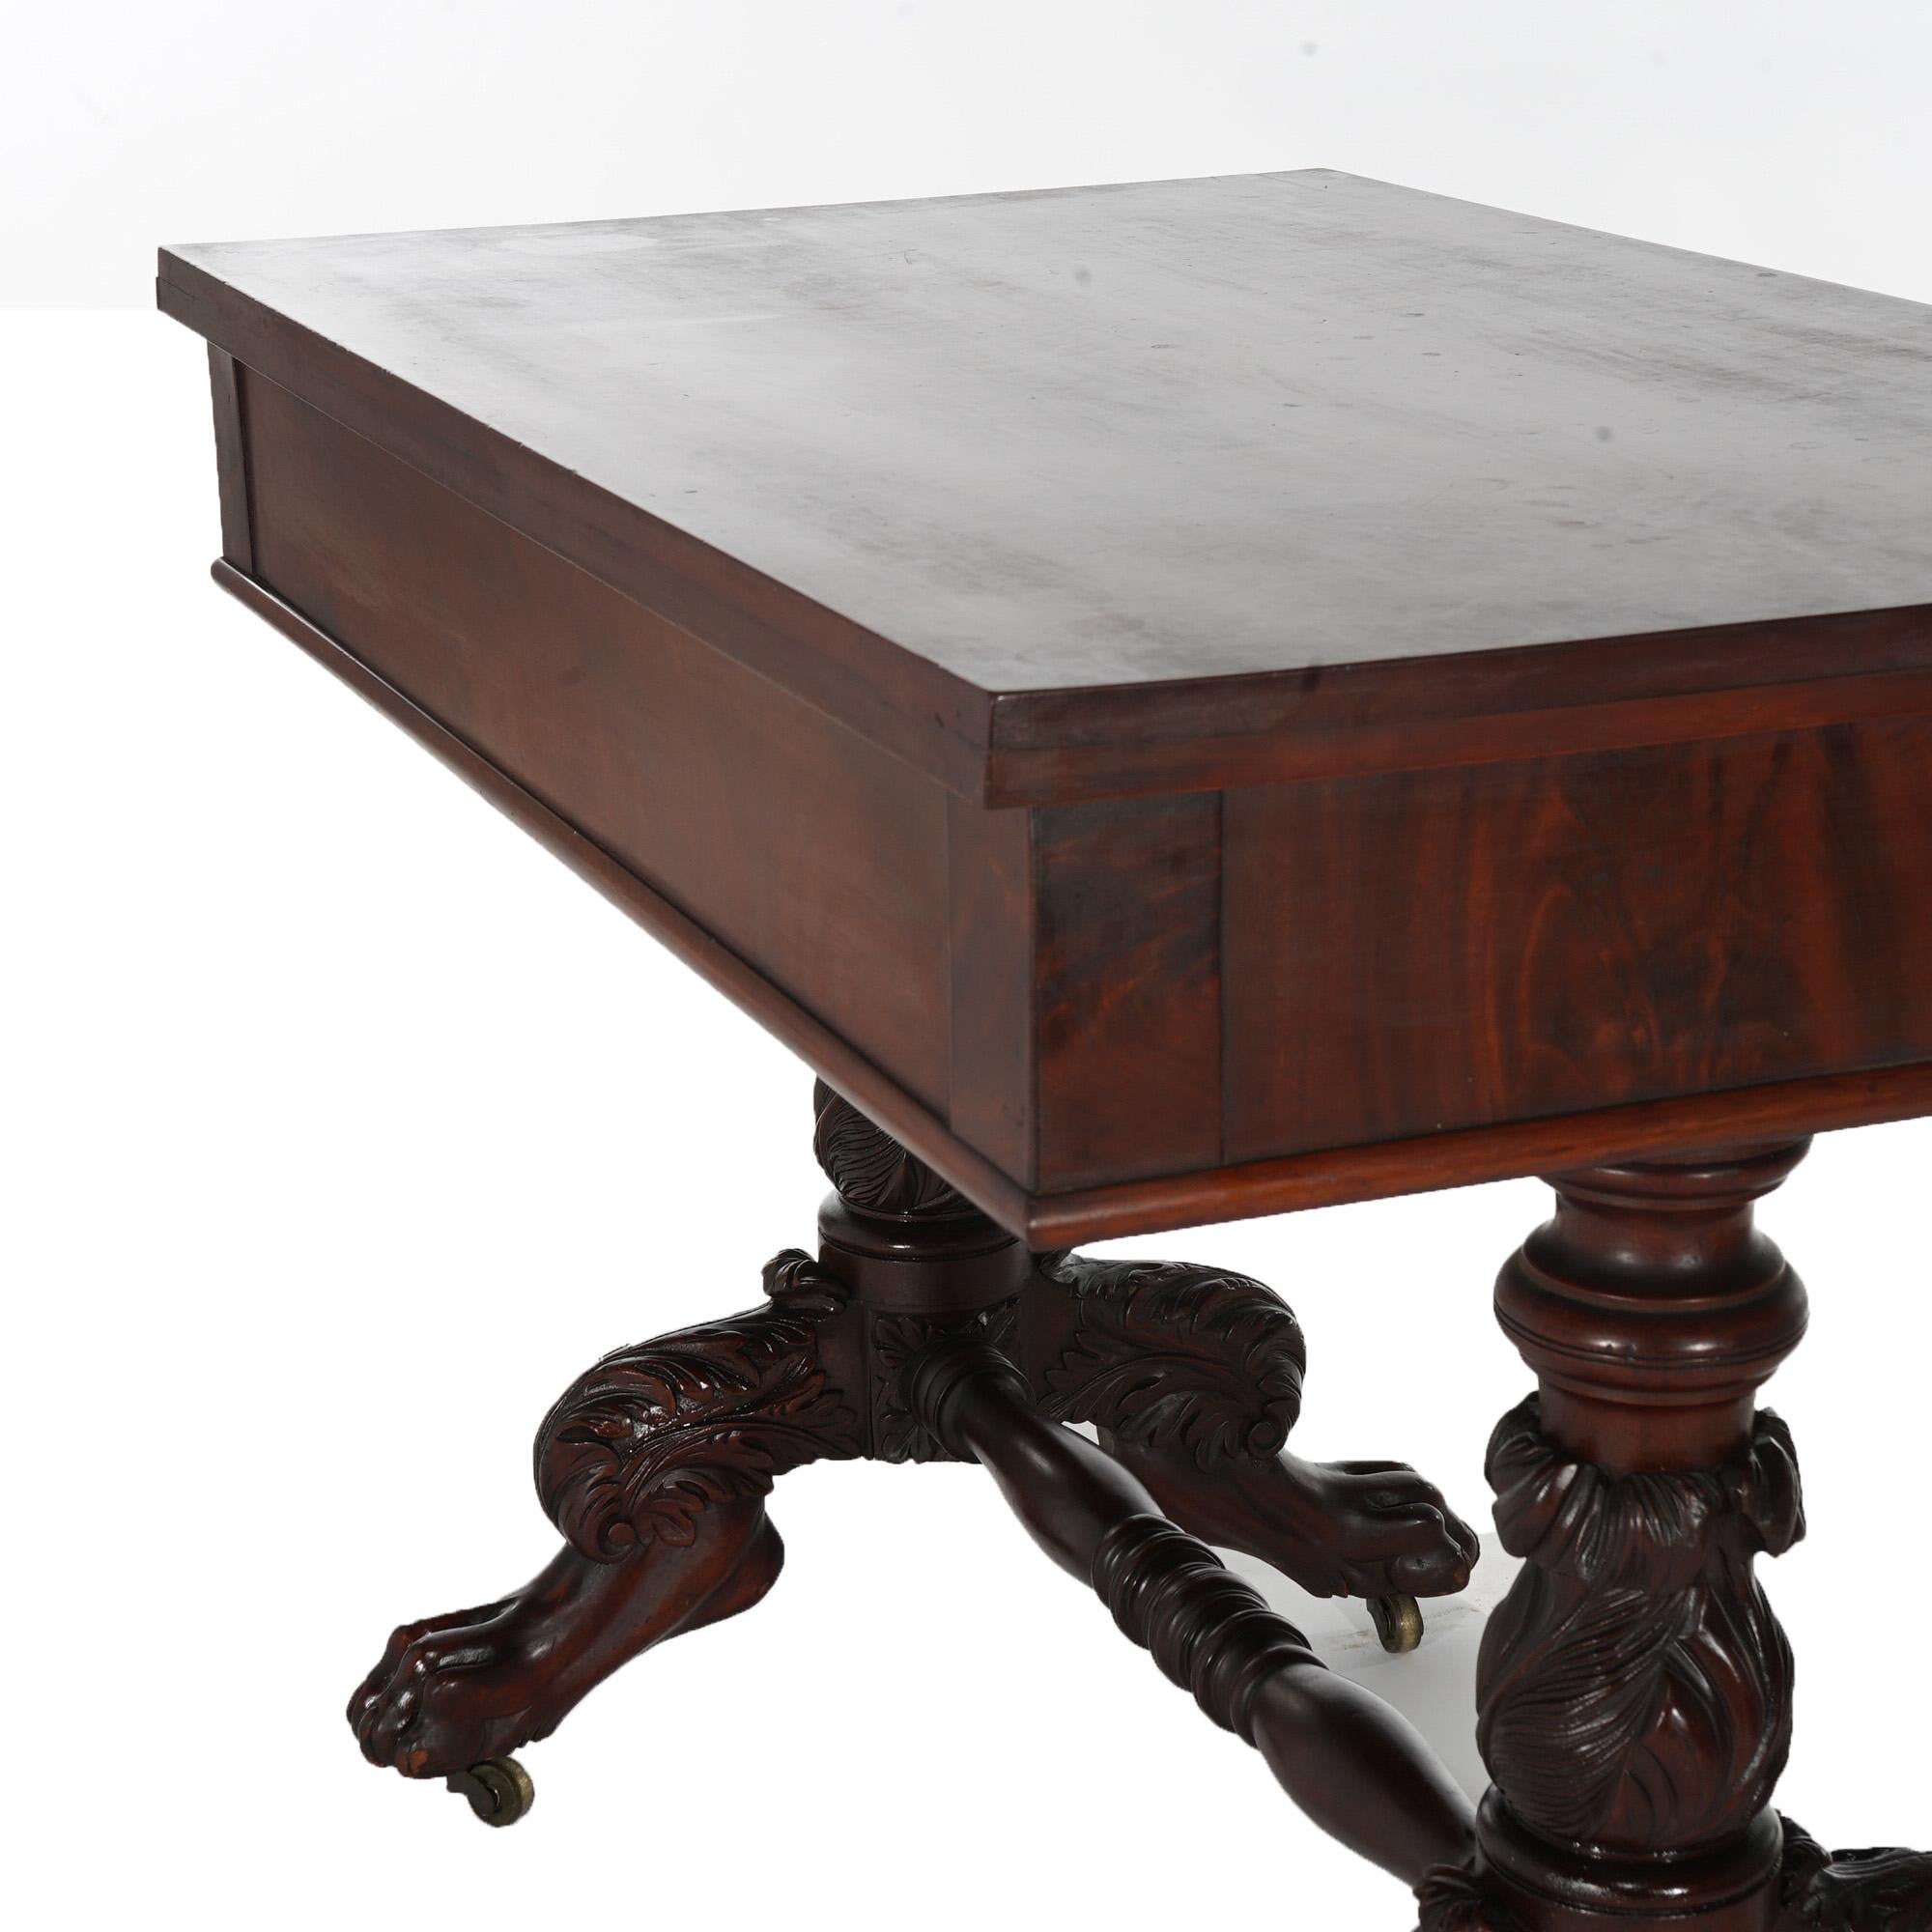 Antique American Empire Flame Mahogany Sofa Table, Carved Acanthus & Paws, C1840 For Sale 9